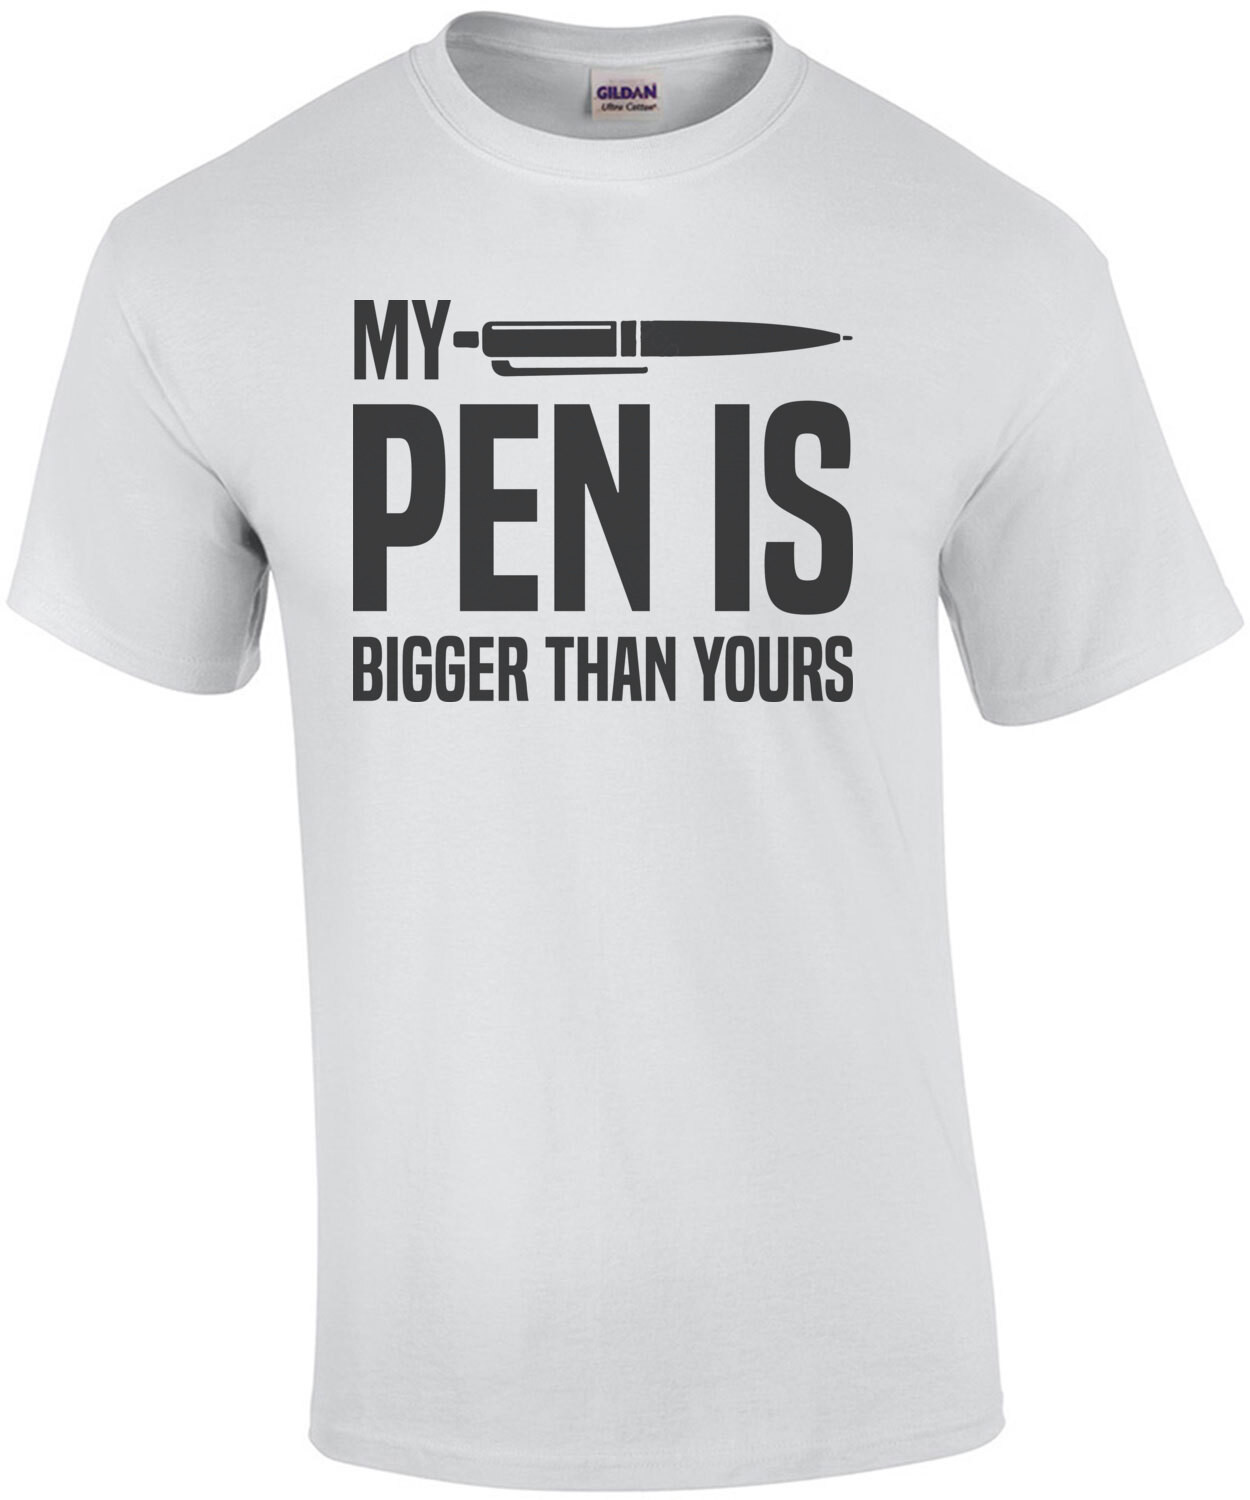 My pen is bigger than yours - funny sexual t-shirt